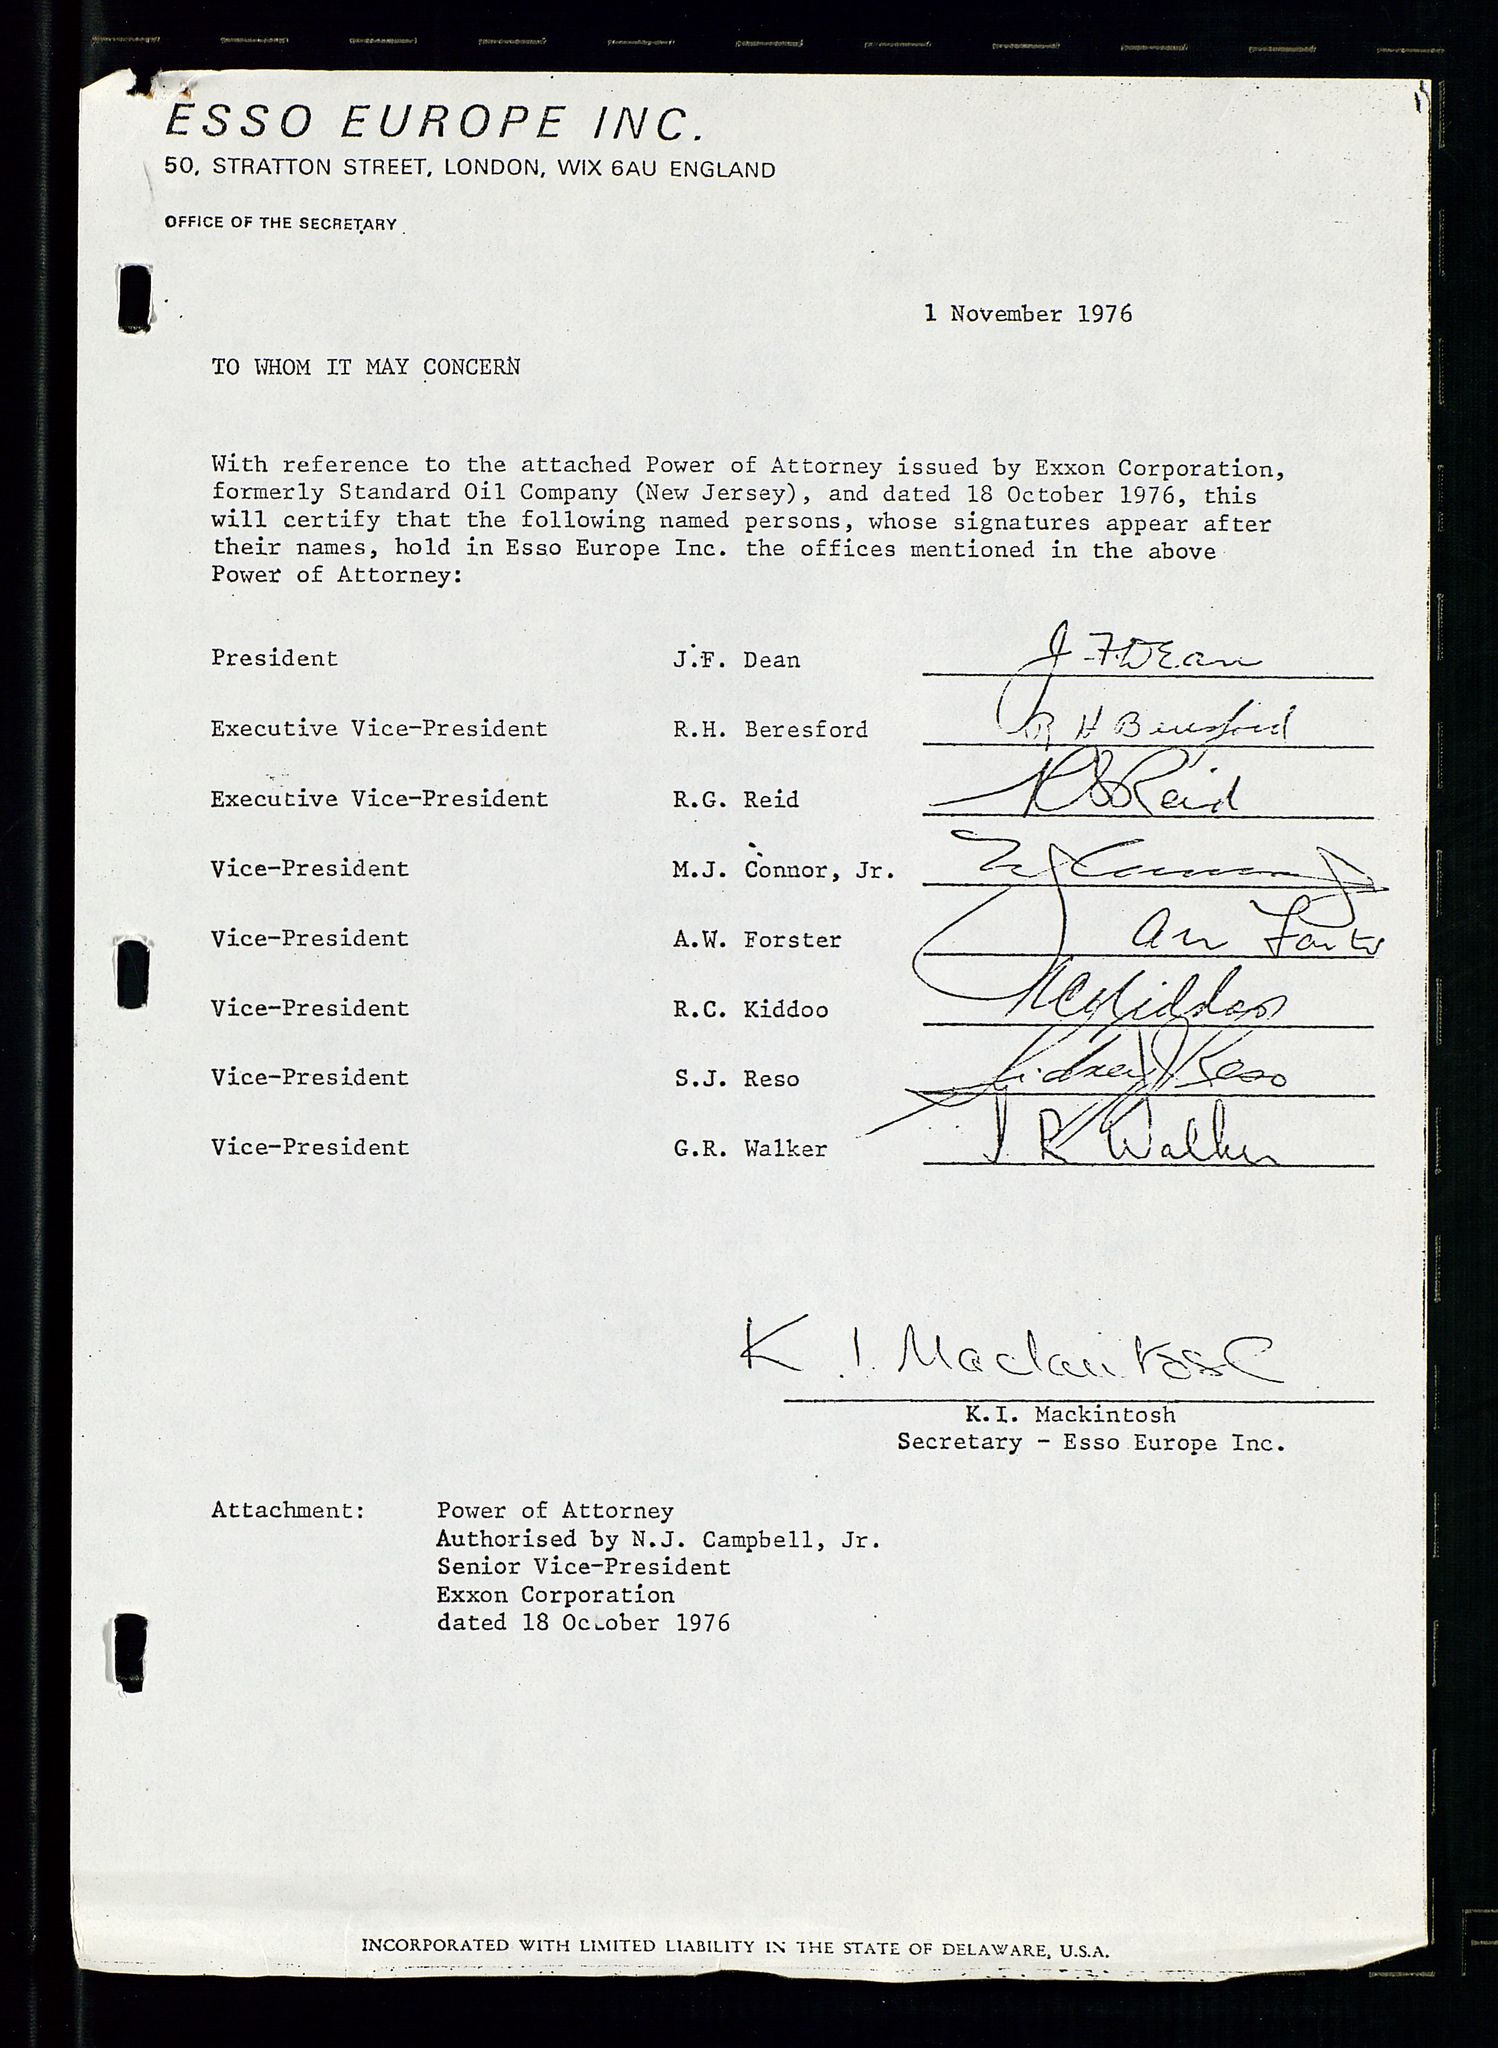 Pa 1512 - Esso Exploration and Production Norway Inc., SAST/A-101917/A/Aa/L0001/0002: Styredokumenter / Corporate records, Board meeting minutes, Agreements, Stocholder meetings, 1975-1979, s. 71